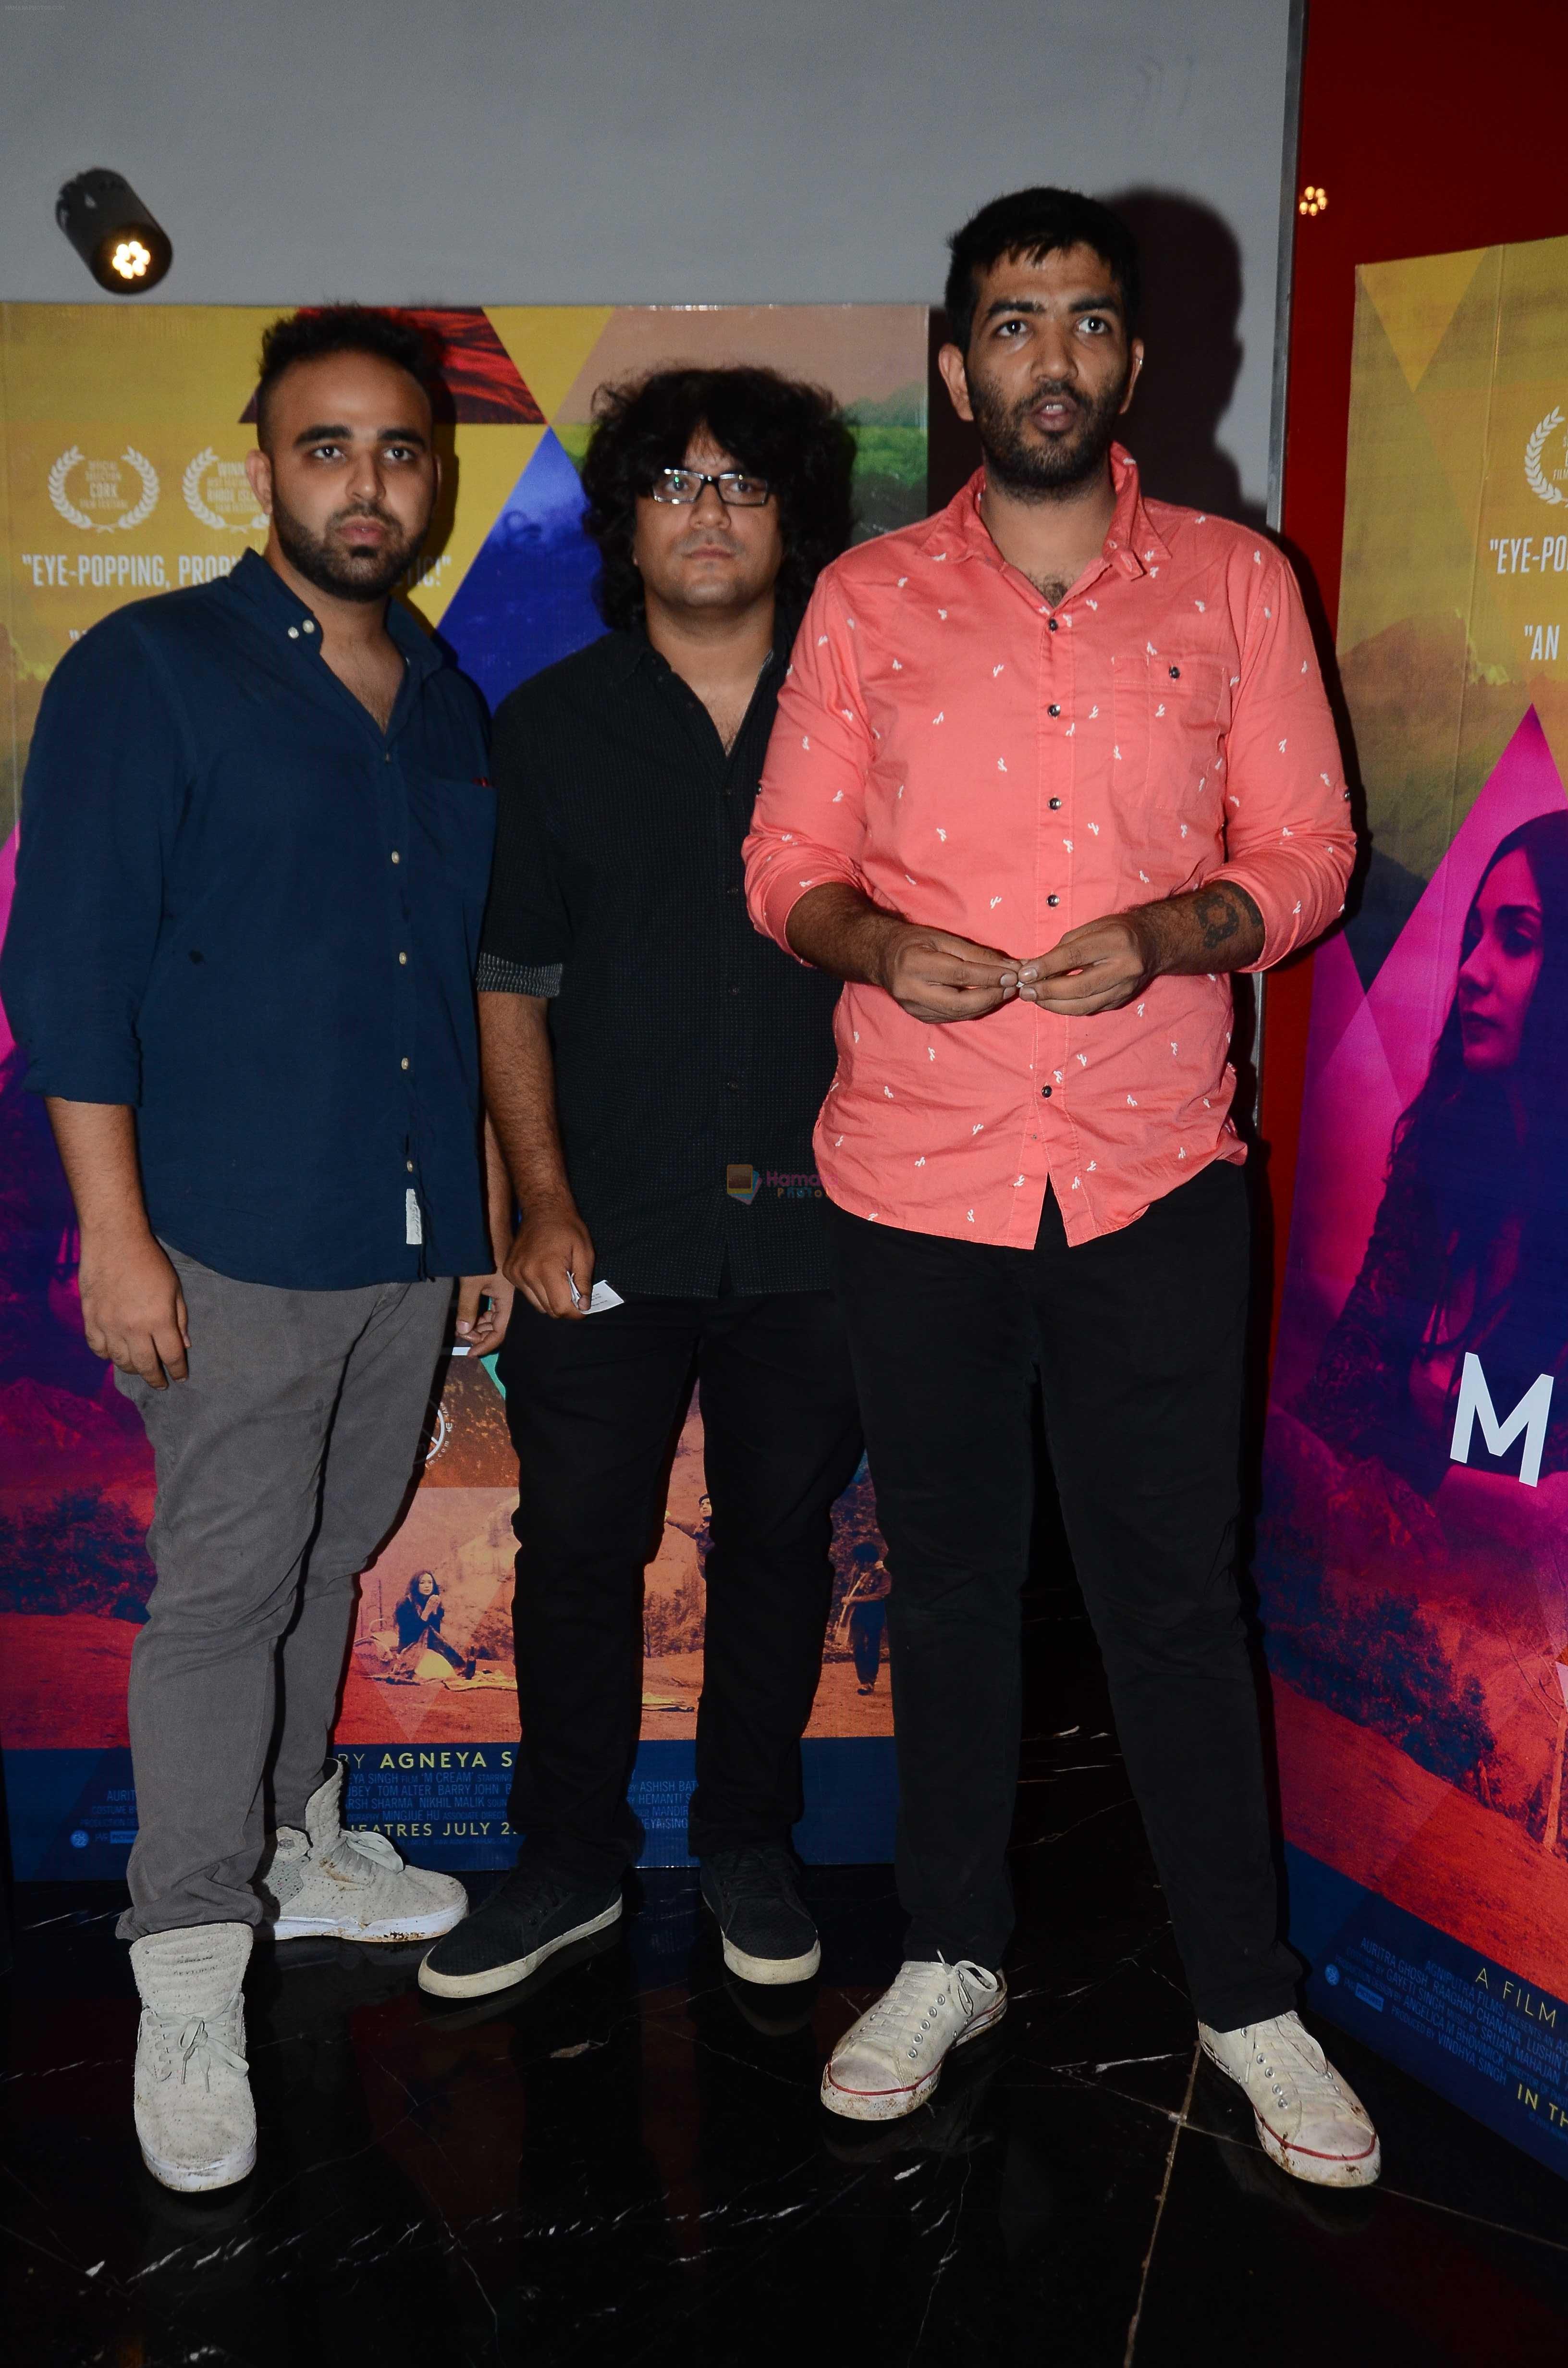 during the special screening of film M Cream on 22 July 2016